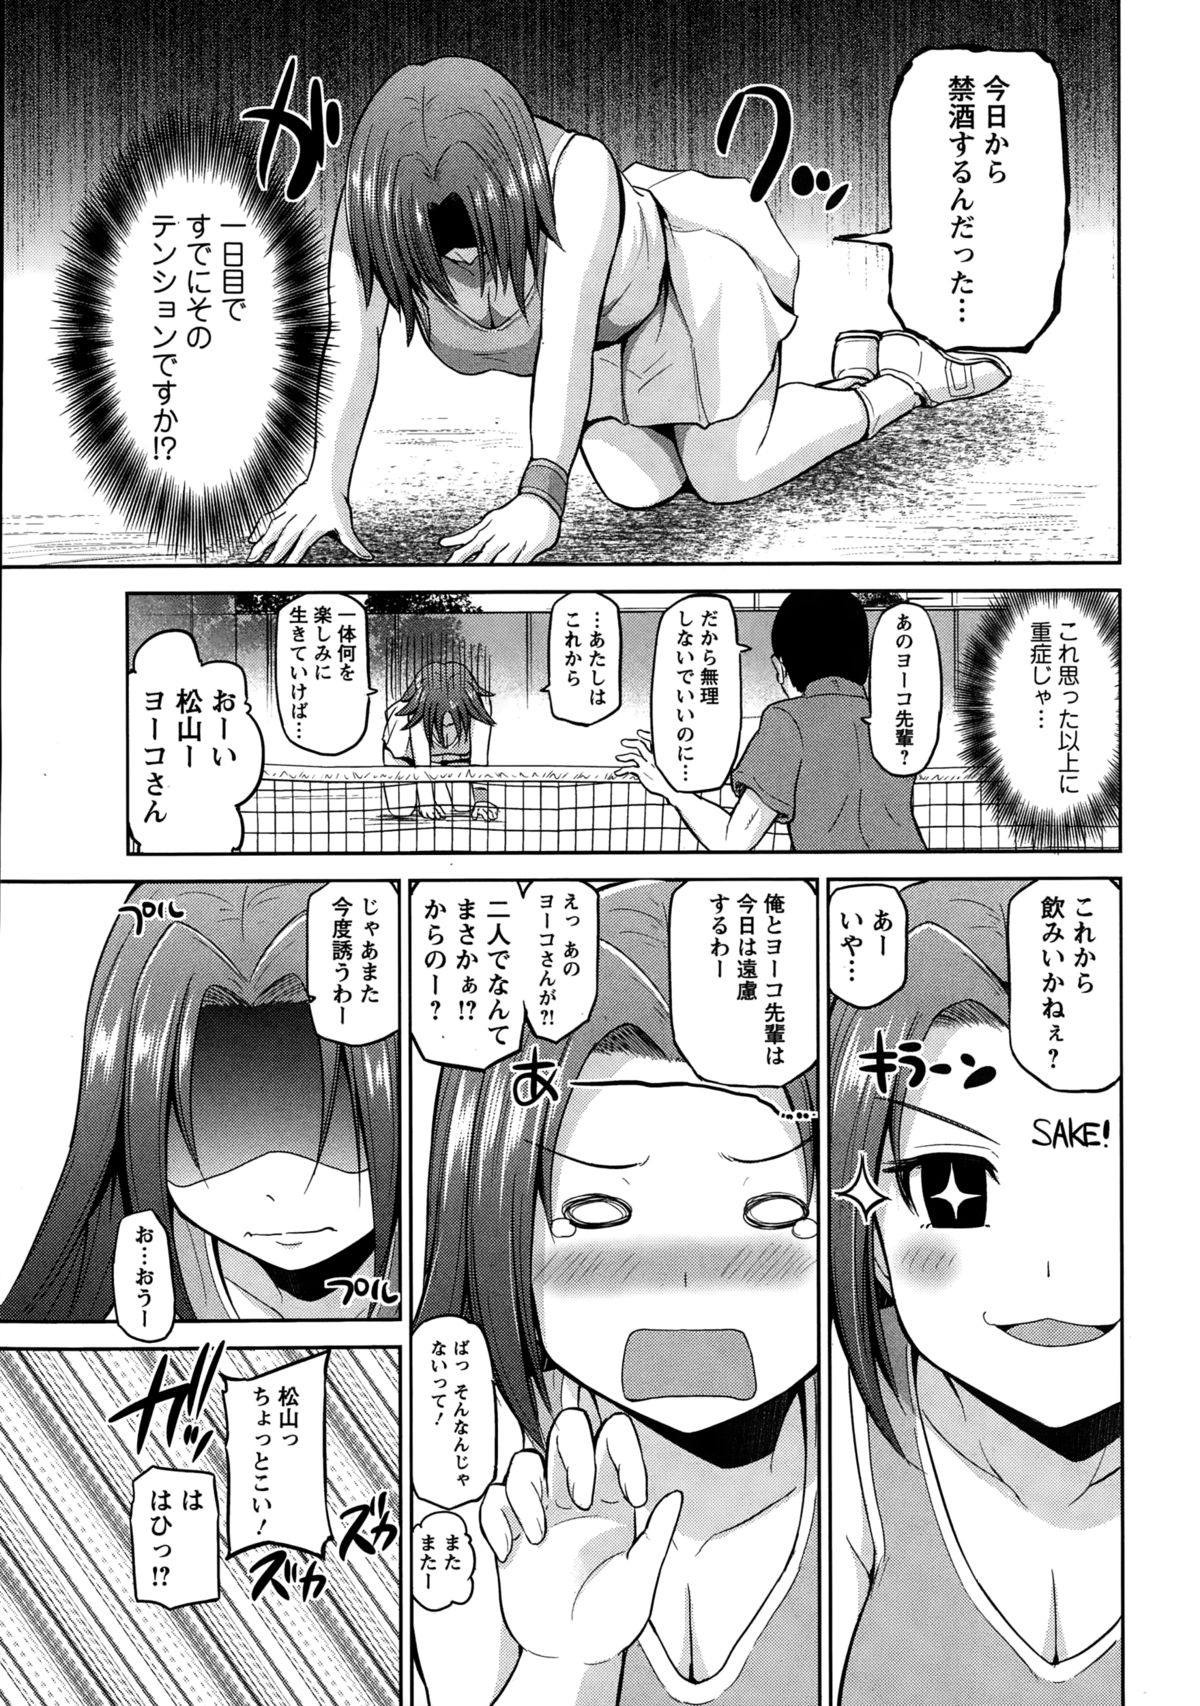 Action Pizazz DX 2015-01 page 9 full